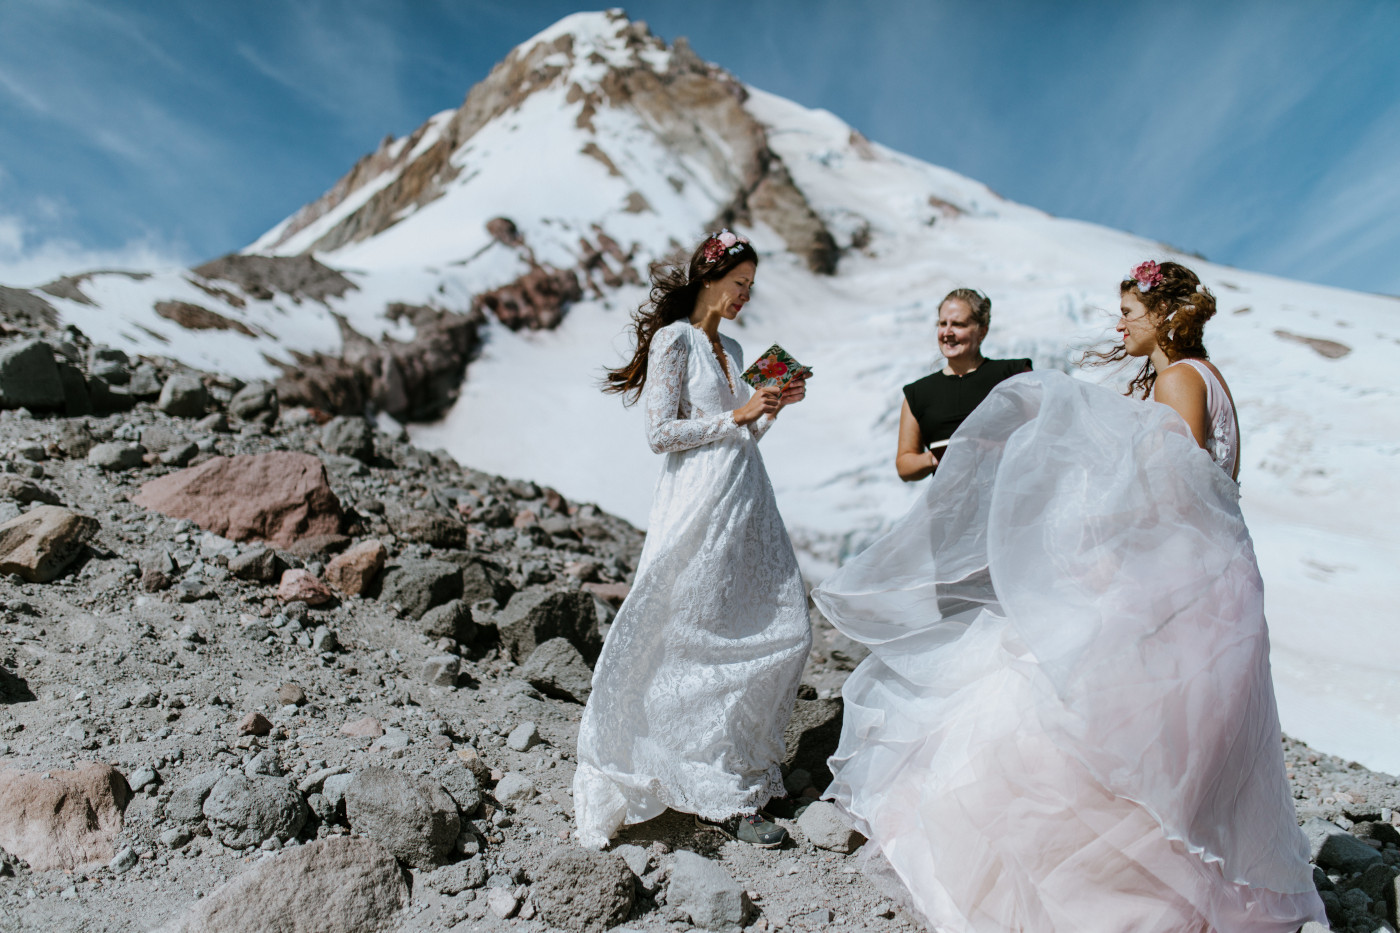 Heather and Margaux during their elopement with a view of Mount Hood in the background. Elopement photography at Mount Hood by Sienna Plus Josh.